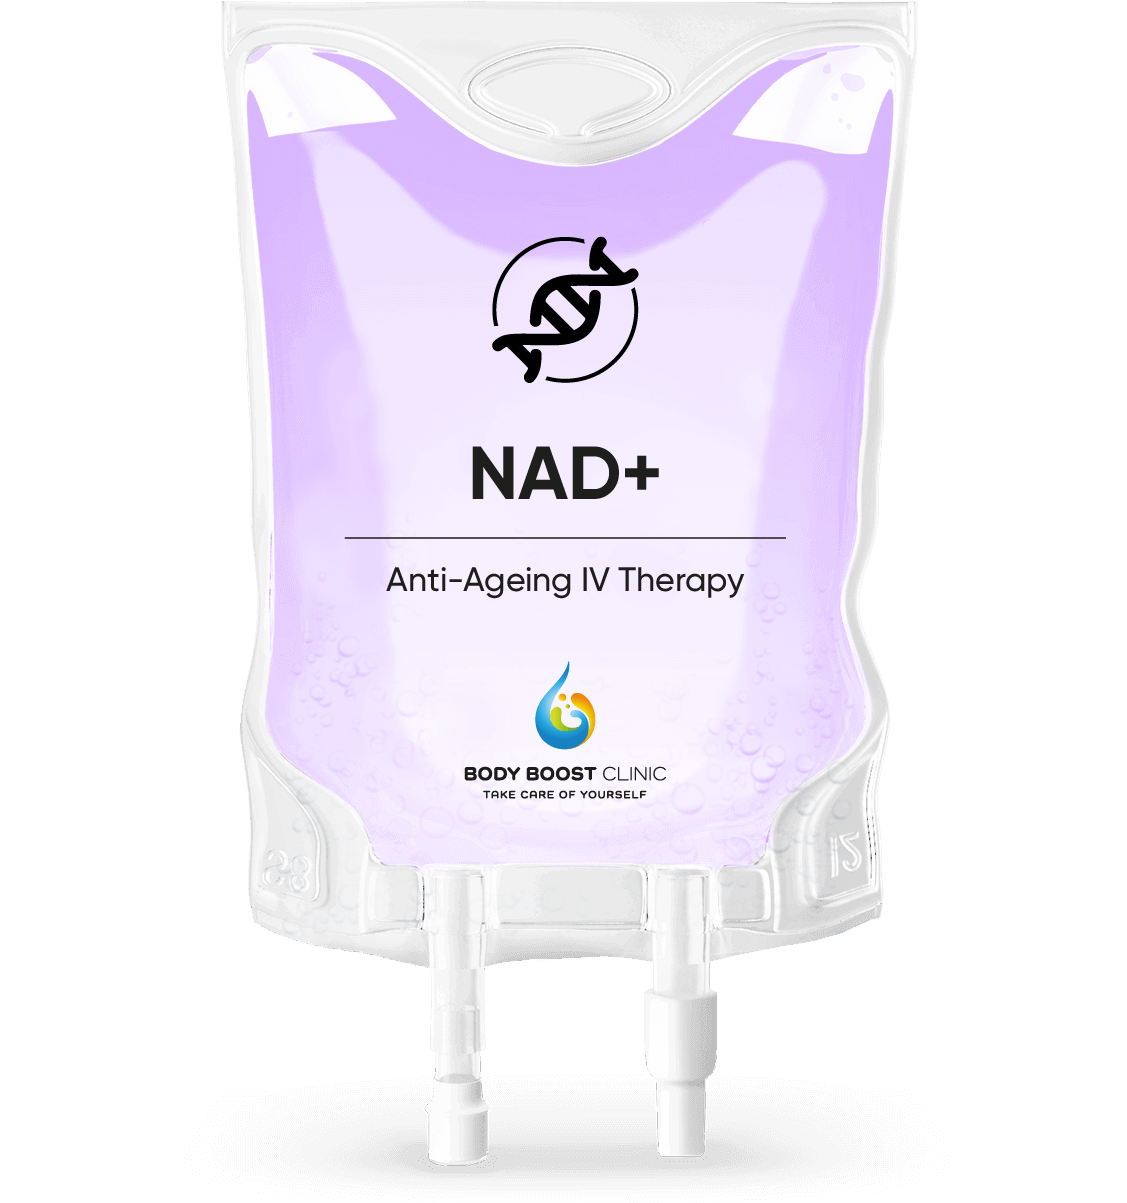 NAD+ Anti-Ageing IV drip Therapy for anti ageing effect in Body boost clinic hull